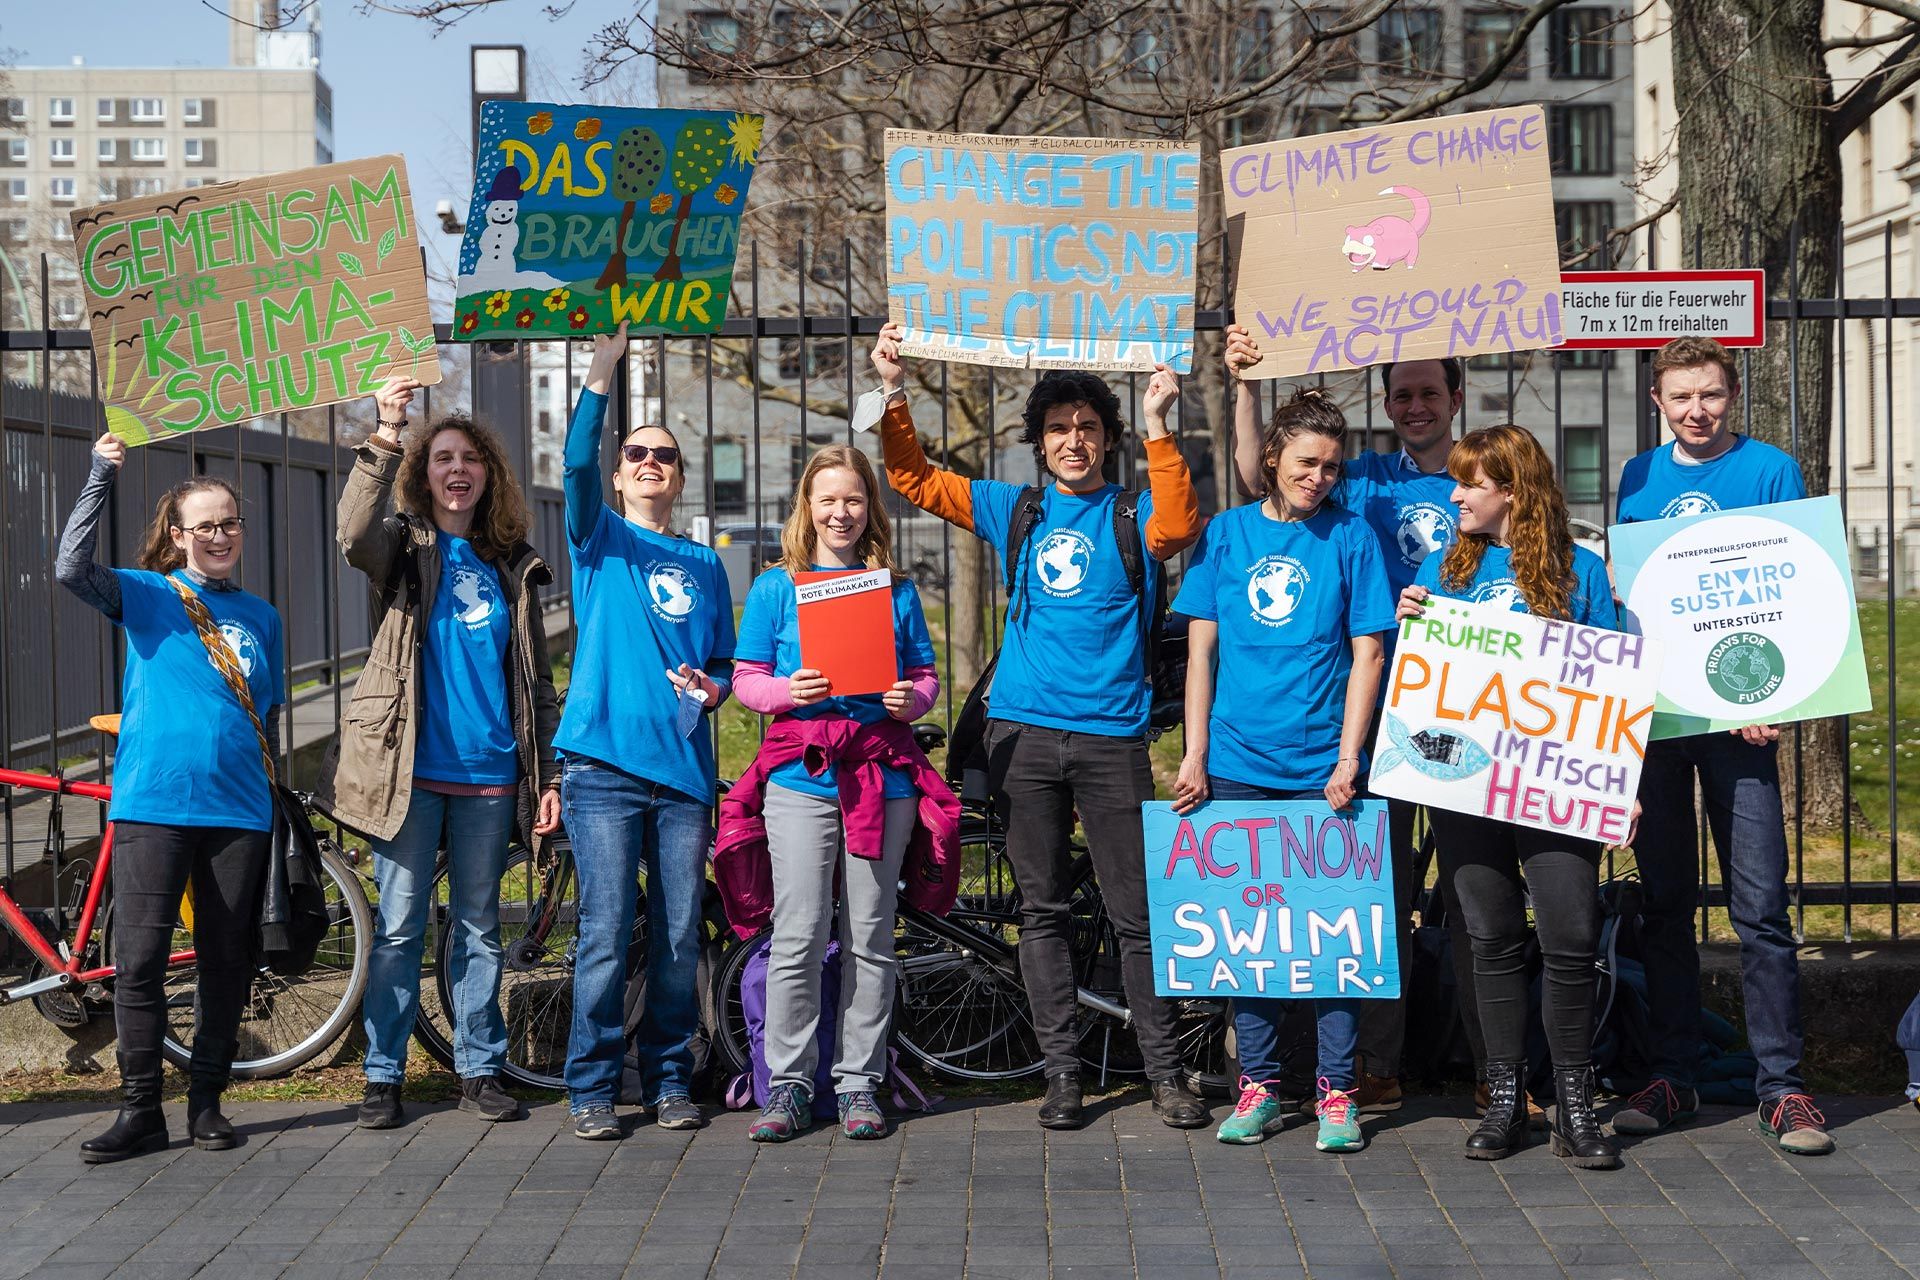 A varied group of people, all wearing blue t-shirts with the earth in white on them stand in front of a tall metal fence which has some biked chained to it. They hold a variety of homemade posters demanding climate action in both English and German.